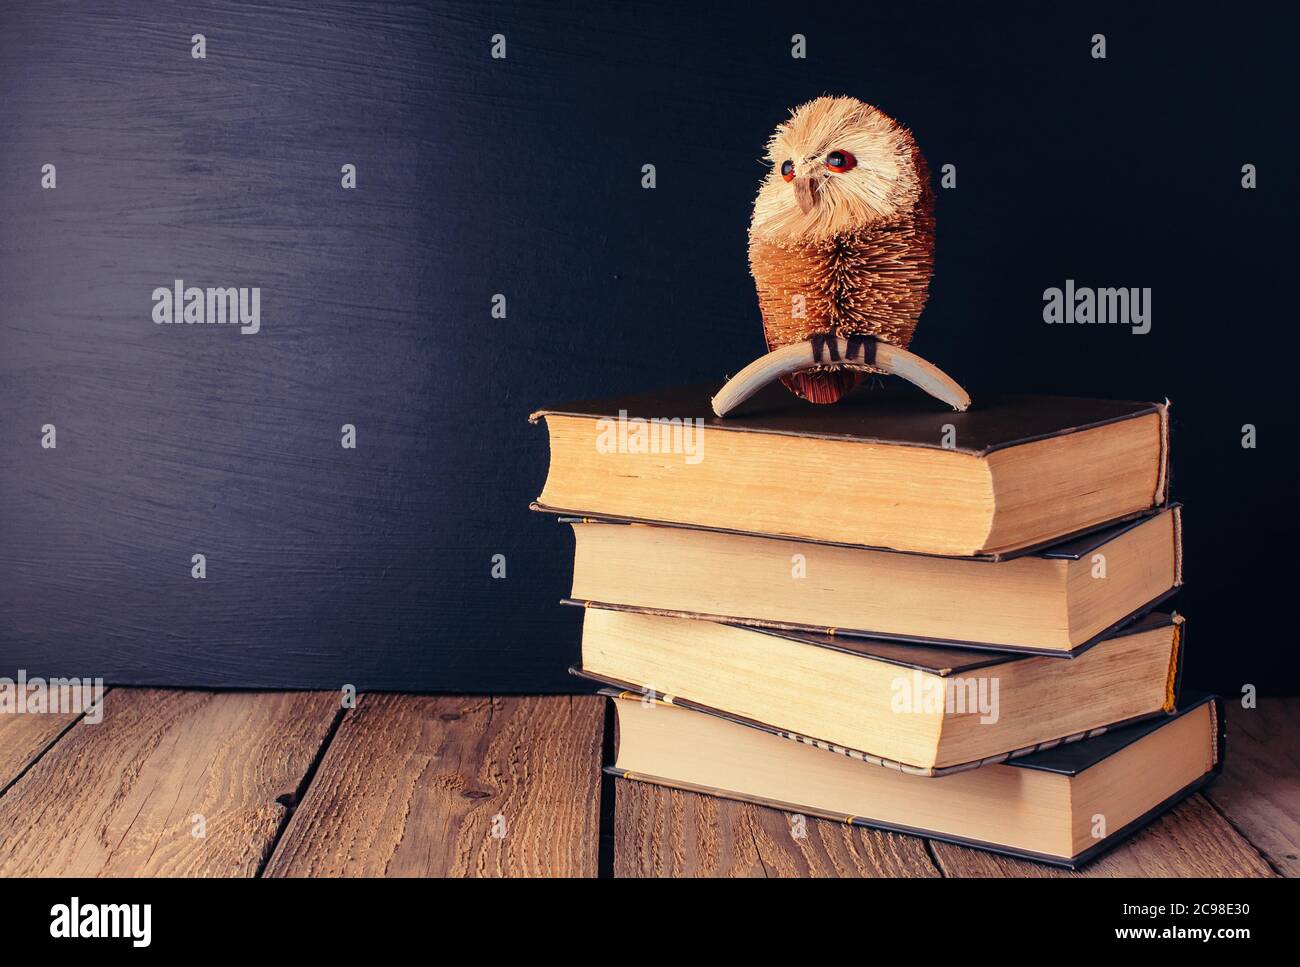 books stacked on a wooden table in a rustic style on the background a school blackboard. Owl on books as a source of wisdom and knowledge. Concept Stock Photo